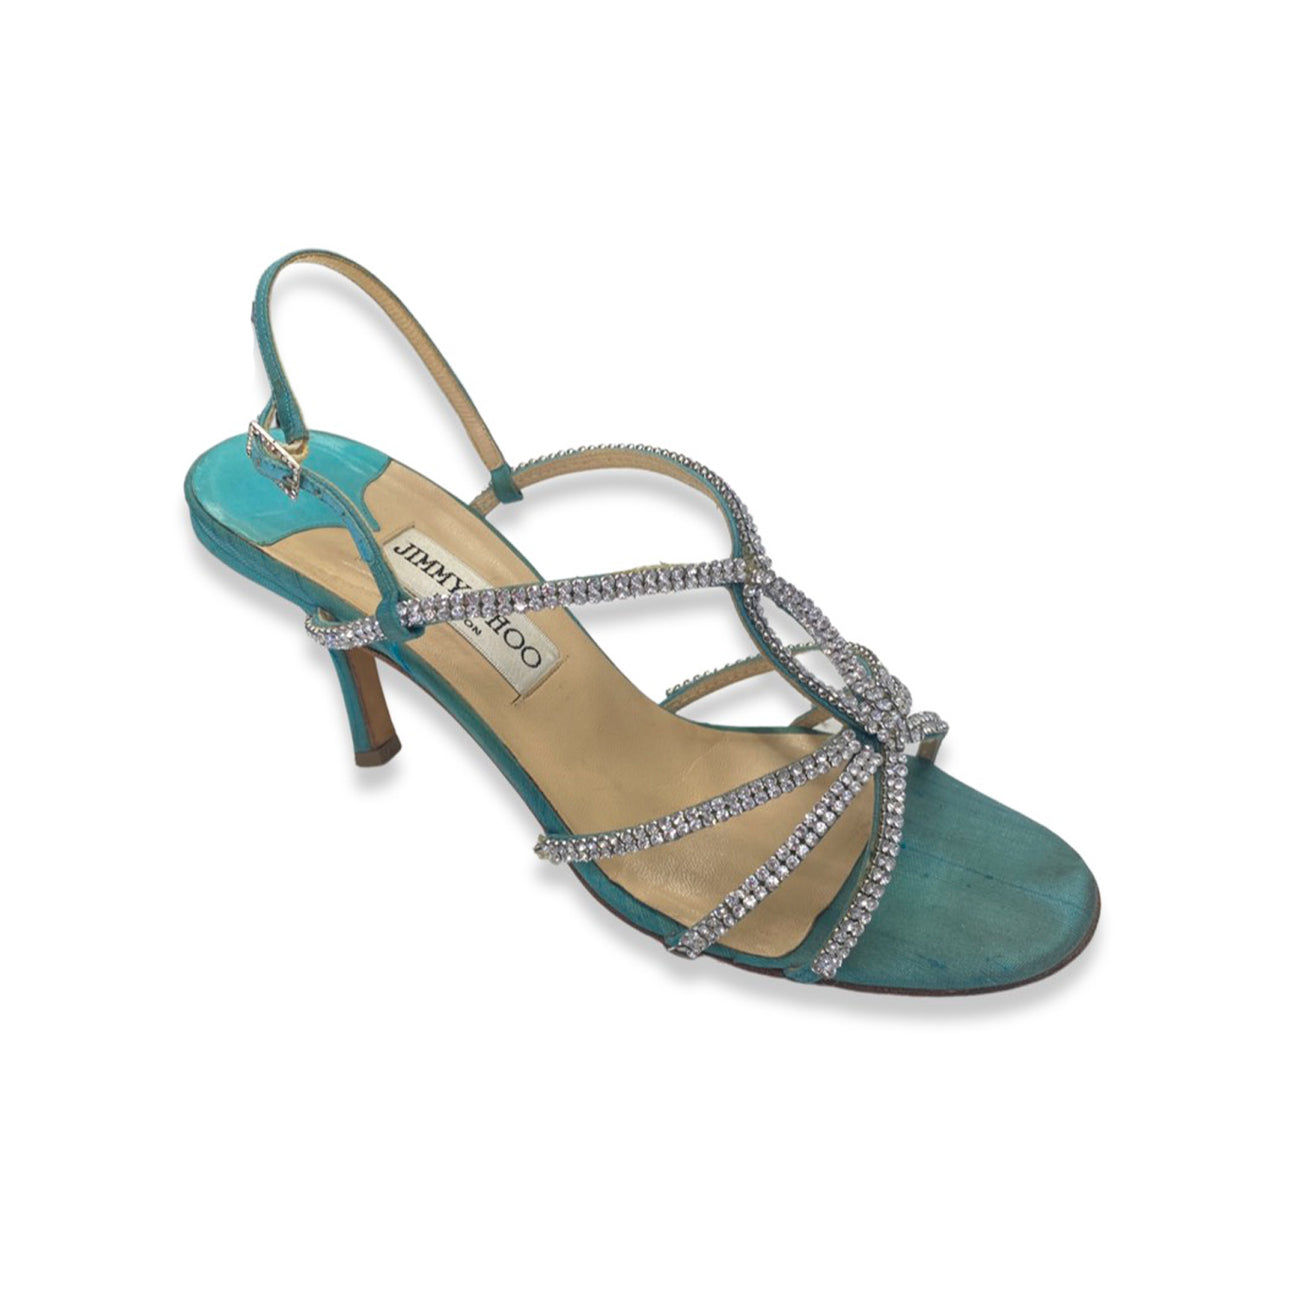 Jimmy Choo Turquoise Patent Leather Sandals - Gorgeous!!